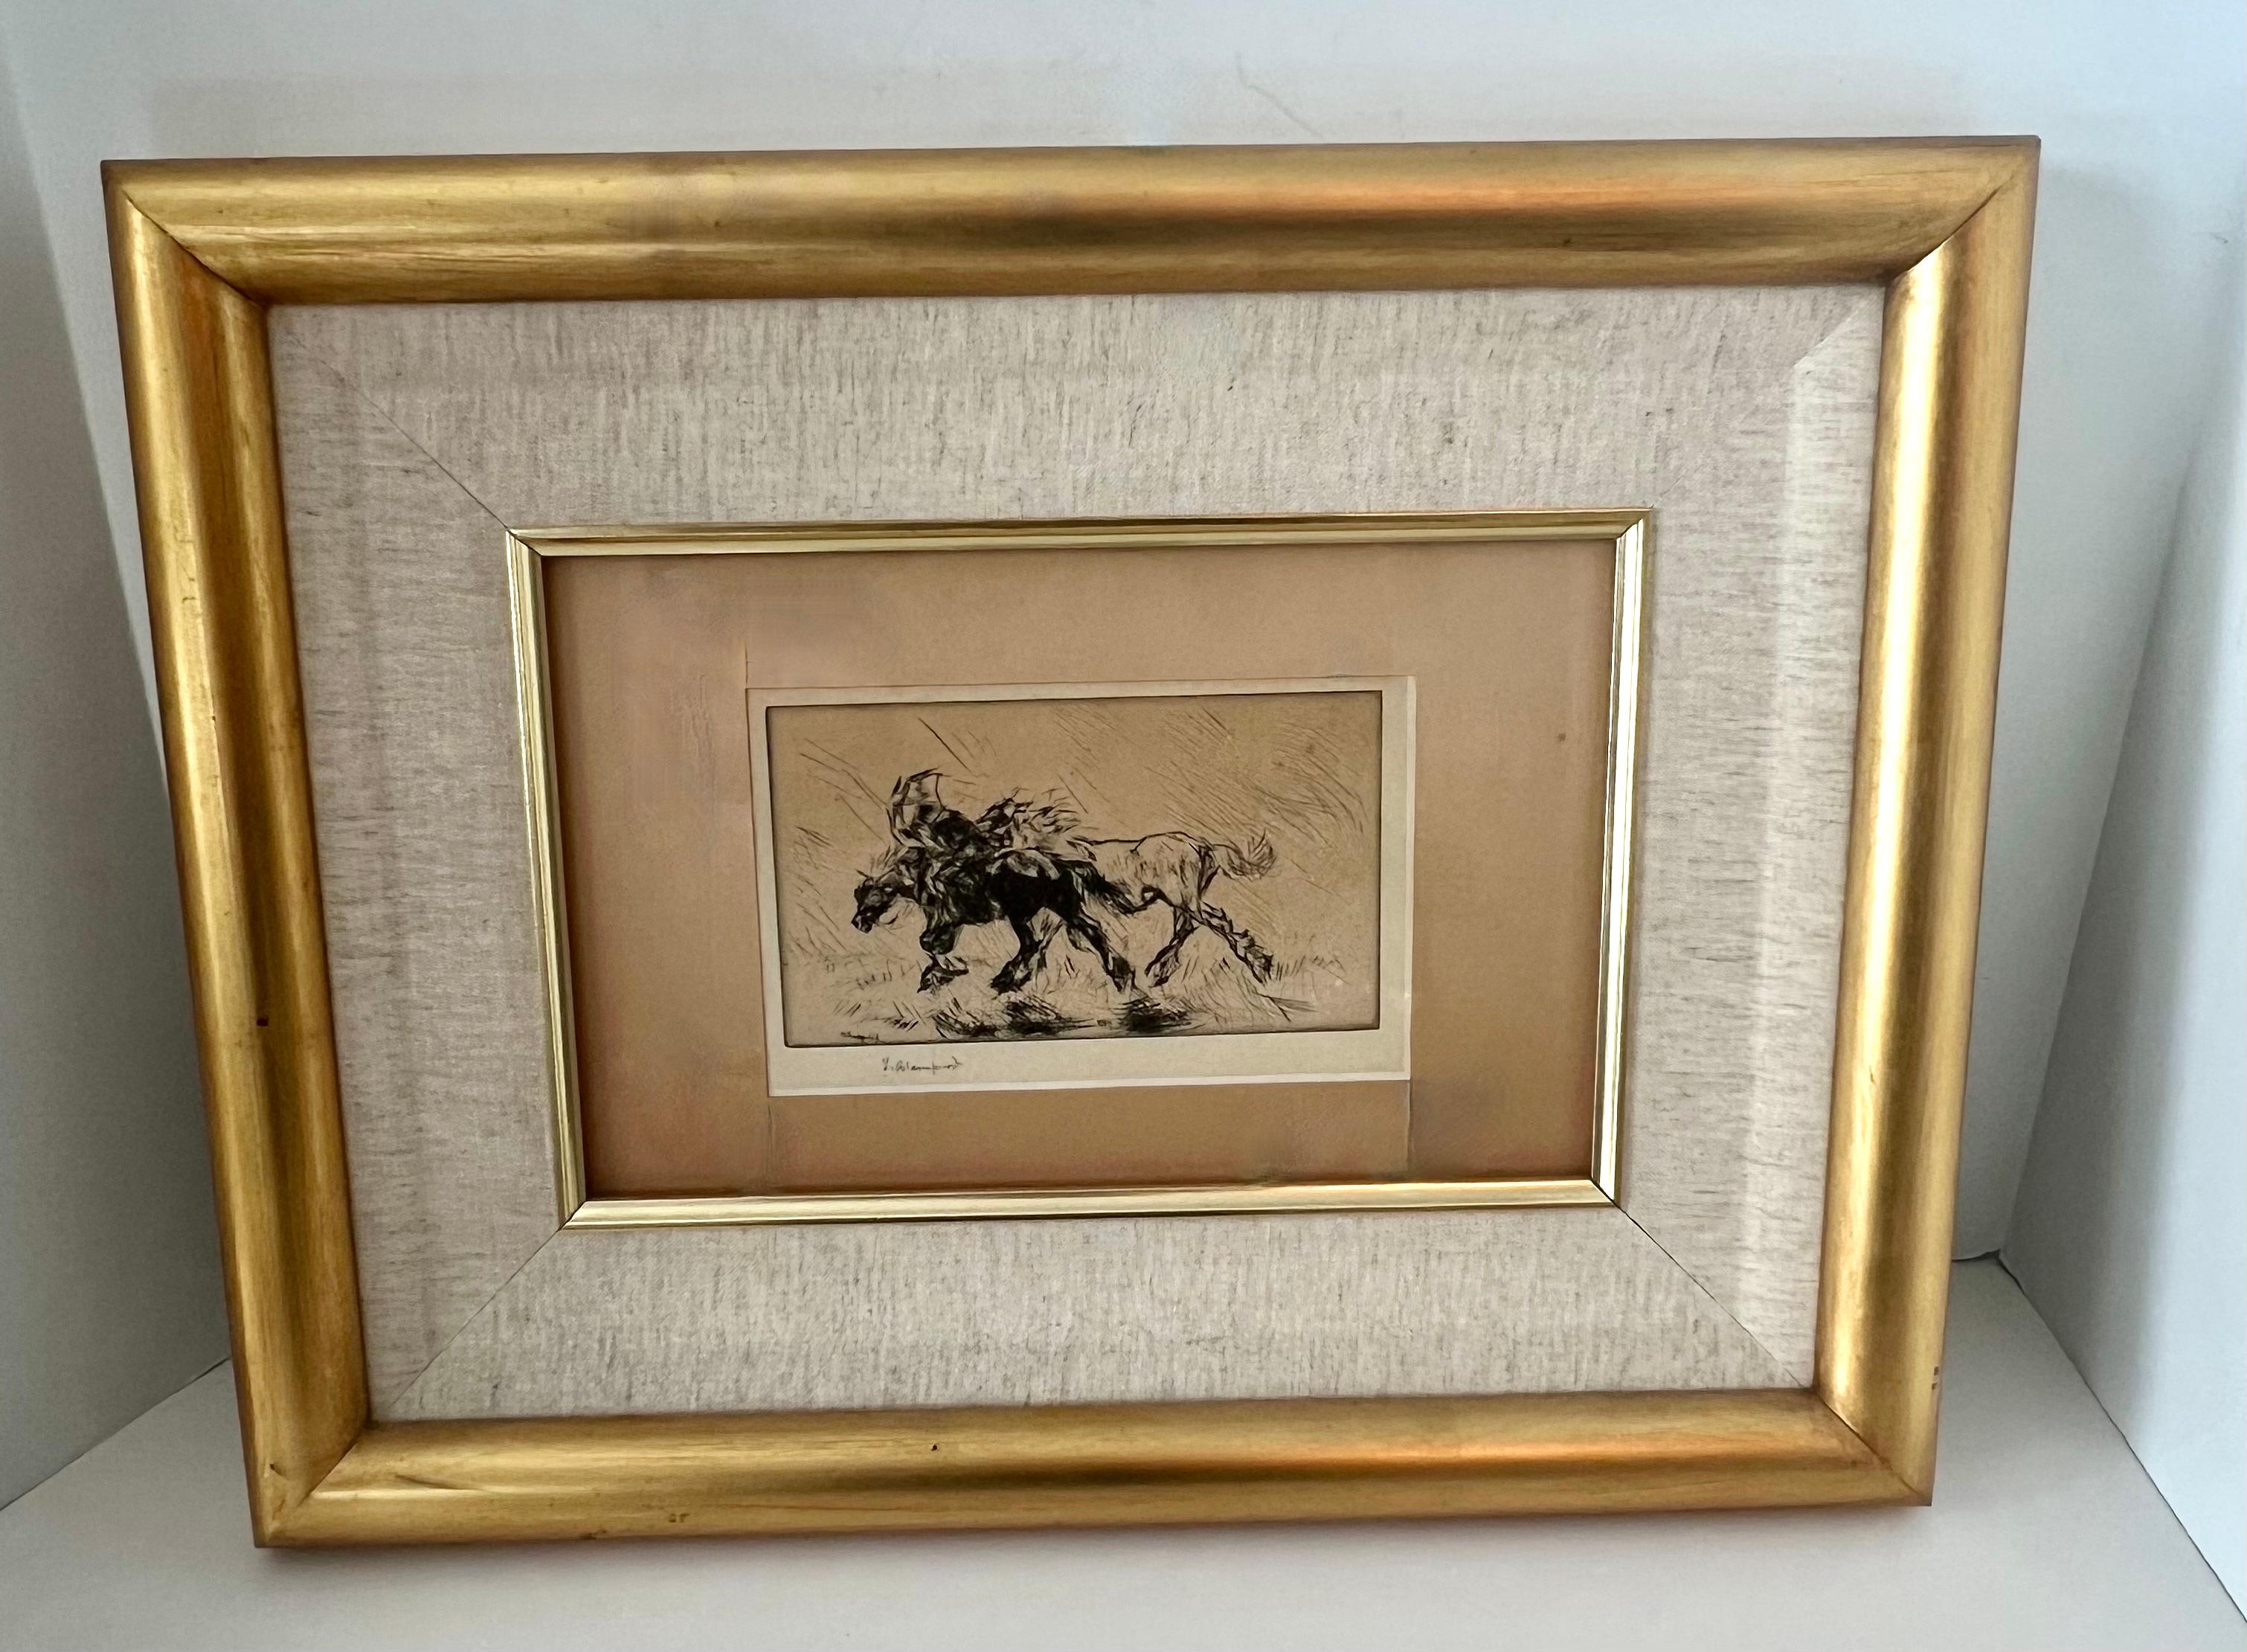  	Edmund Blampied Pen Drawing of a Horse Matted and Framed in Gilt Frame For Sale 3